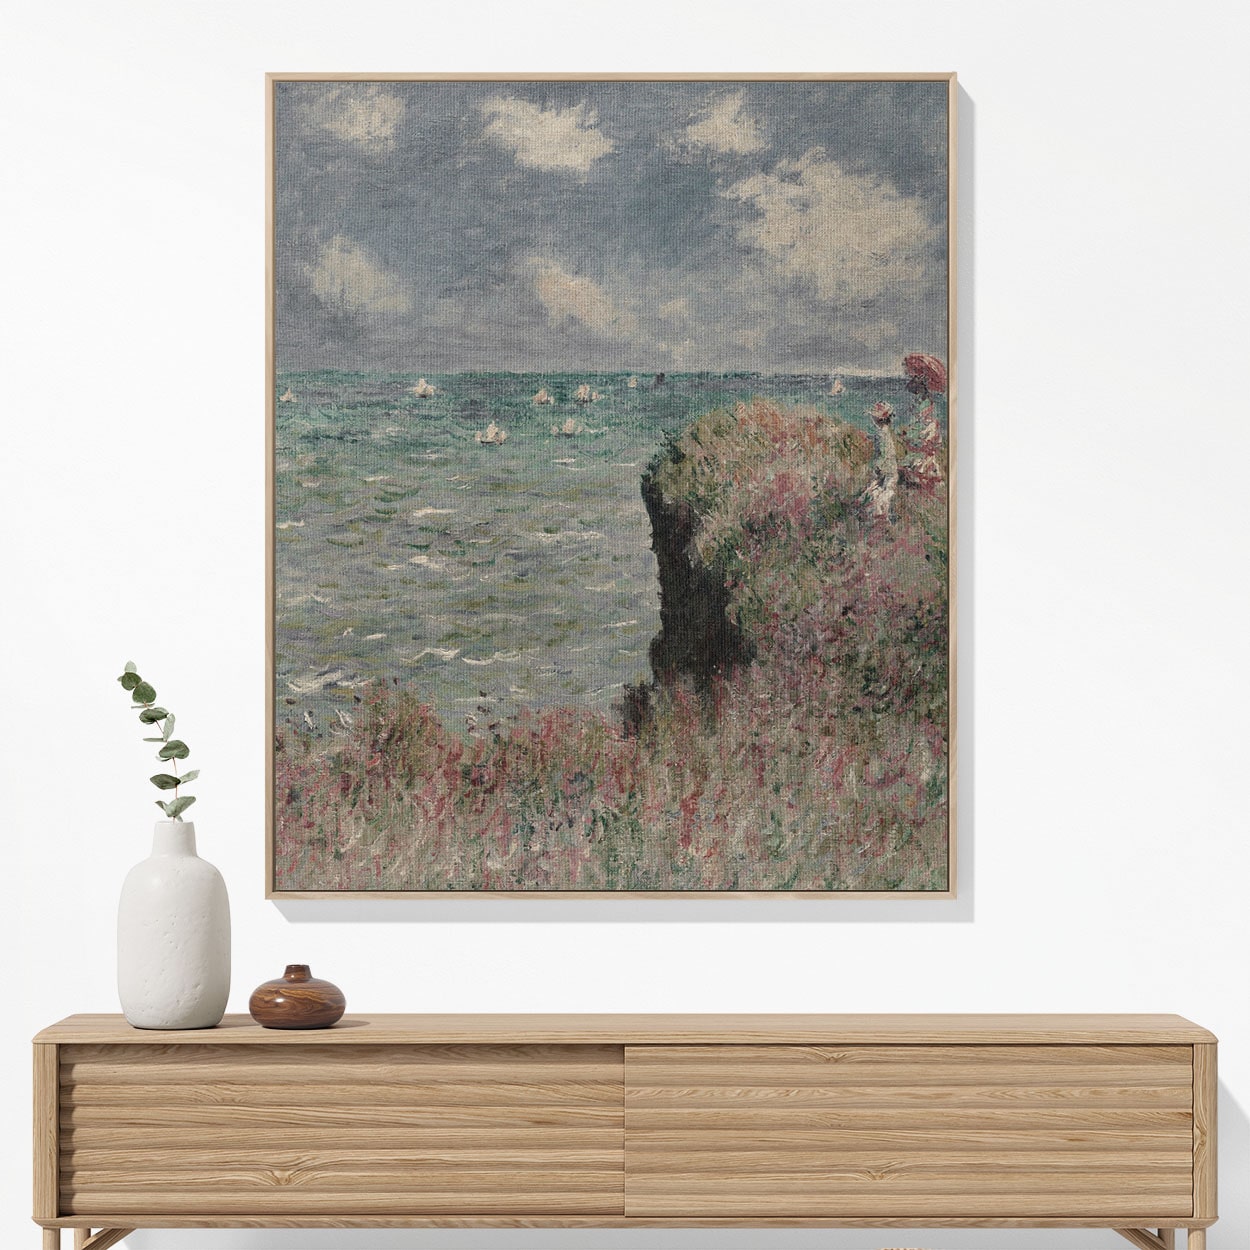 Summer Seascape Woven Blanket Woven Blanket Hanging on a Wall as Framed Wall Art